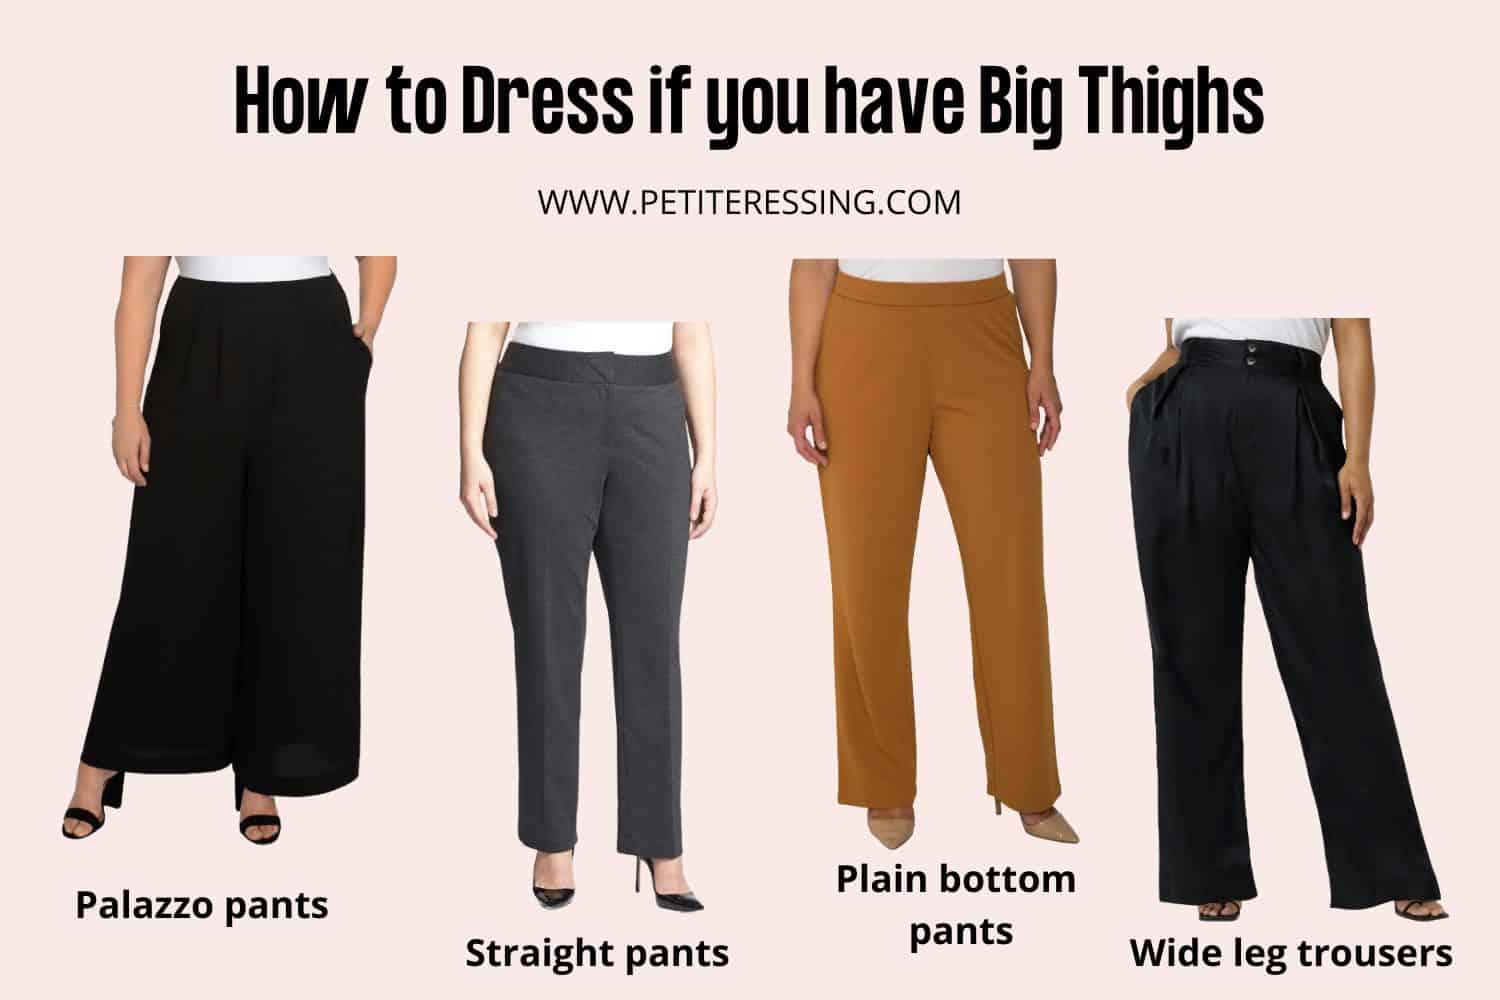 How-to-dress-if-you-have-big-thighs-2